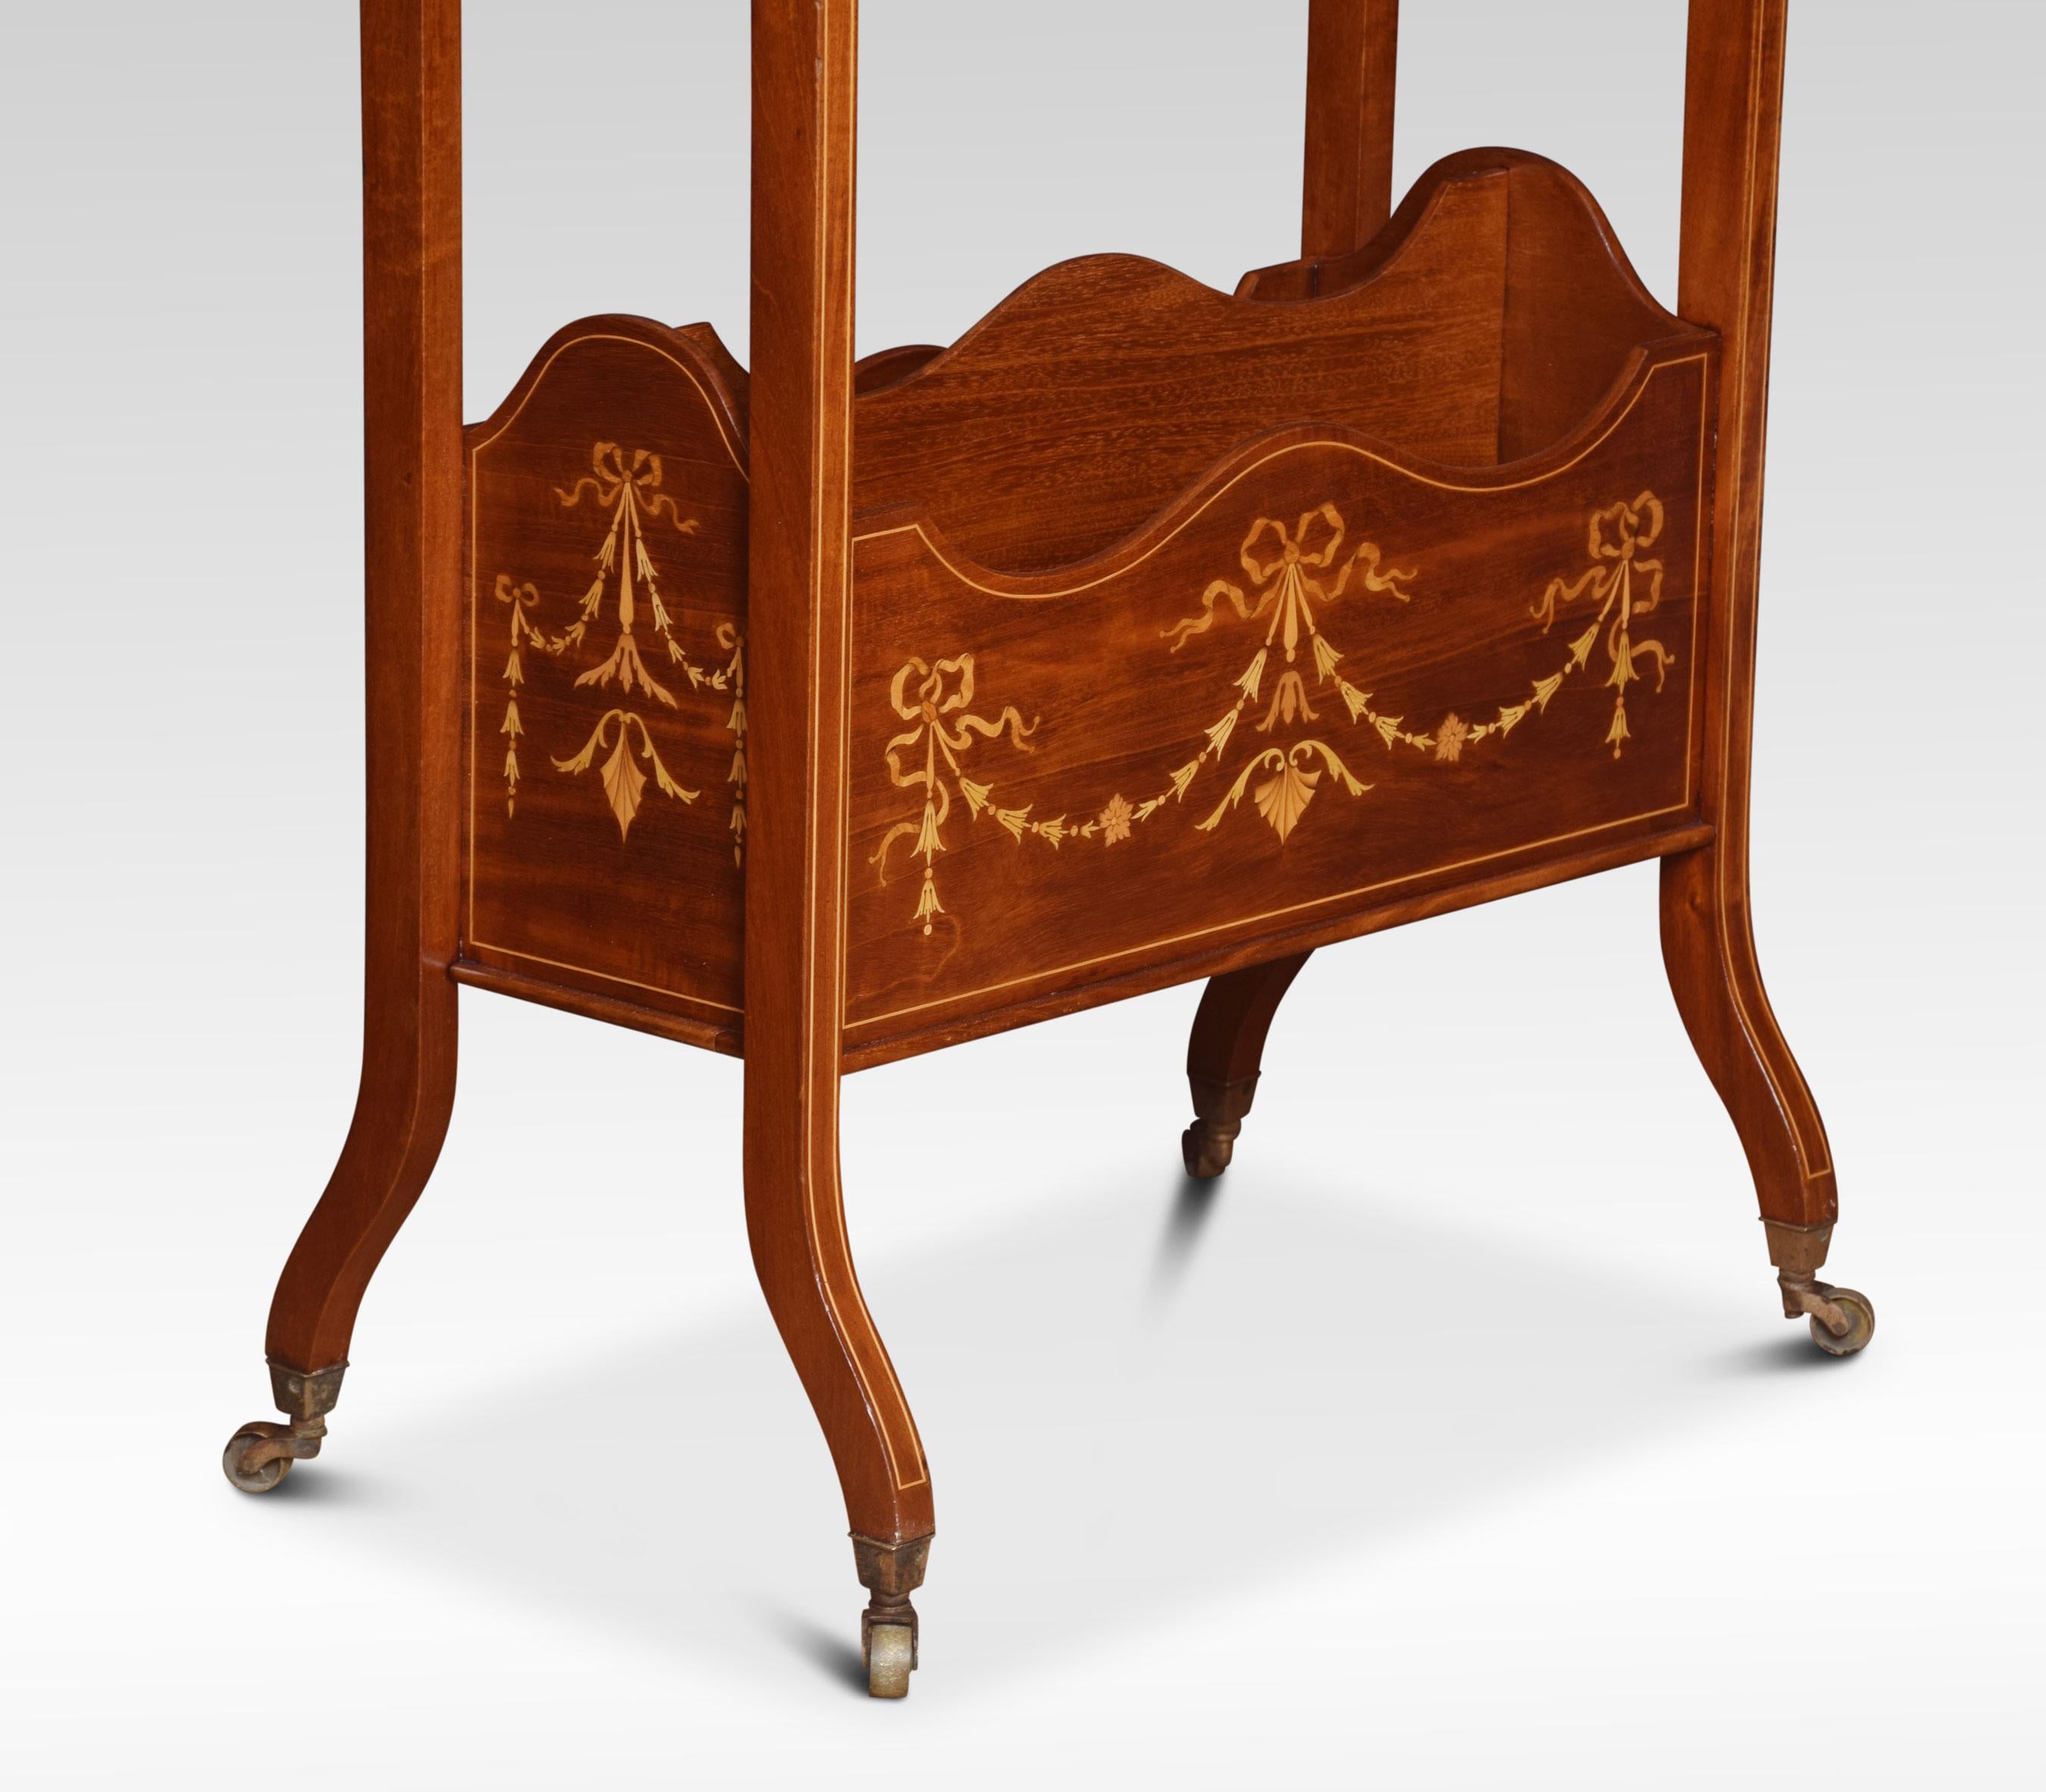 Regency style inlaid mahogany freestanding book trough, the trough above a single shelf and twin compartment magazine rack, inlaid with harebell swags and stringing. Raised up on slender out swept legs of square section terminating in brass